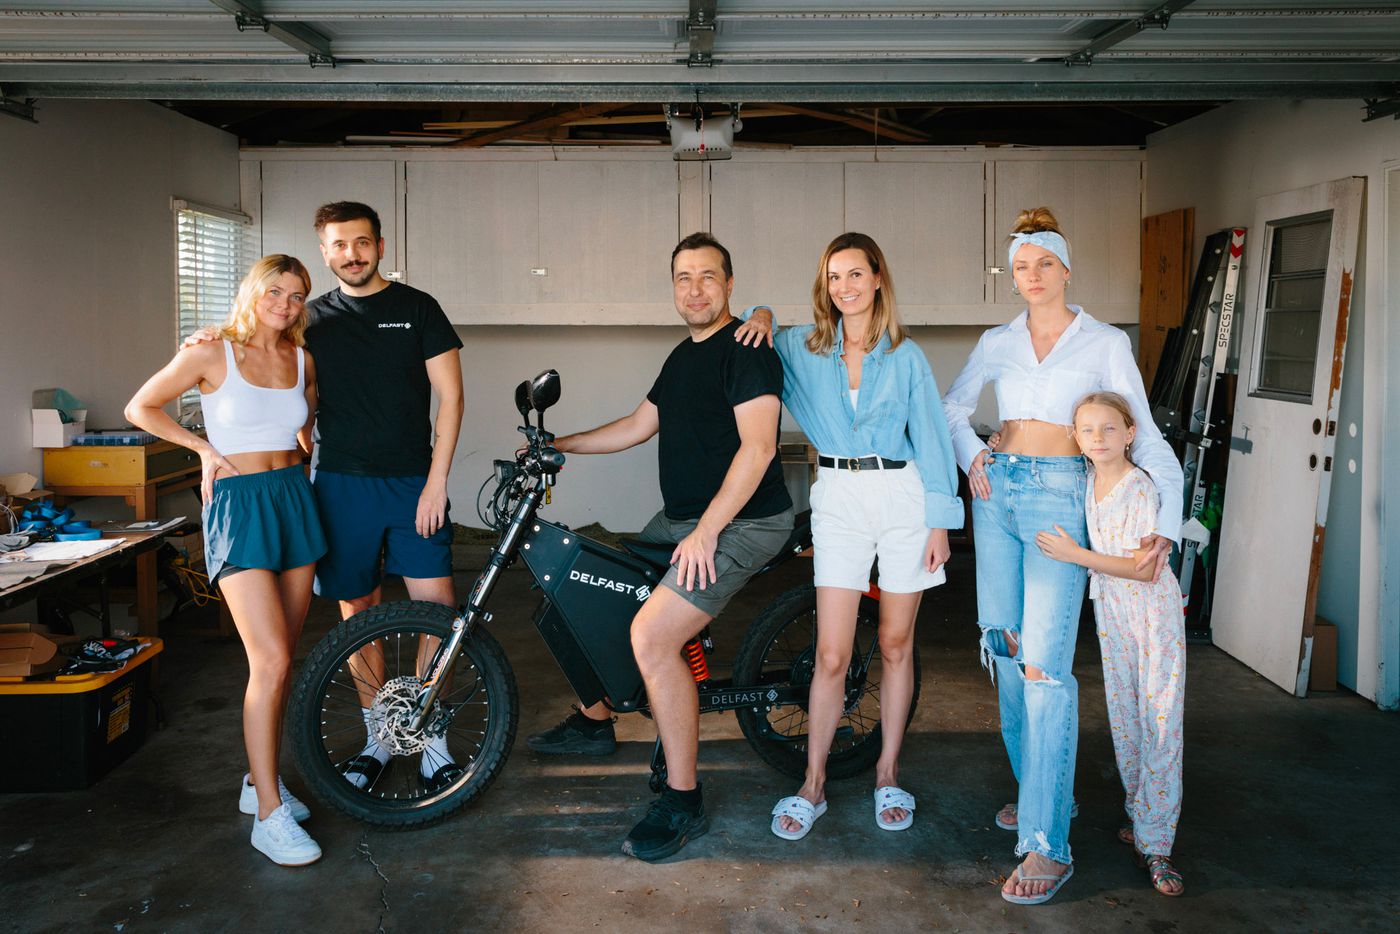 Tonkopi and Anna with some Delfast employees and their families: Lucy Farrell, Andrii Tarnavskyi, Daniel Tonkopi, Anna, Daria Minakova and her daughter Oleksandra in Los Angeles, Califonia, August 26th, 2022.